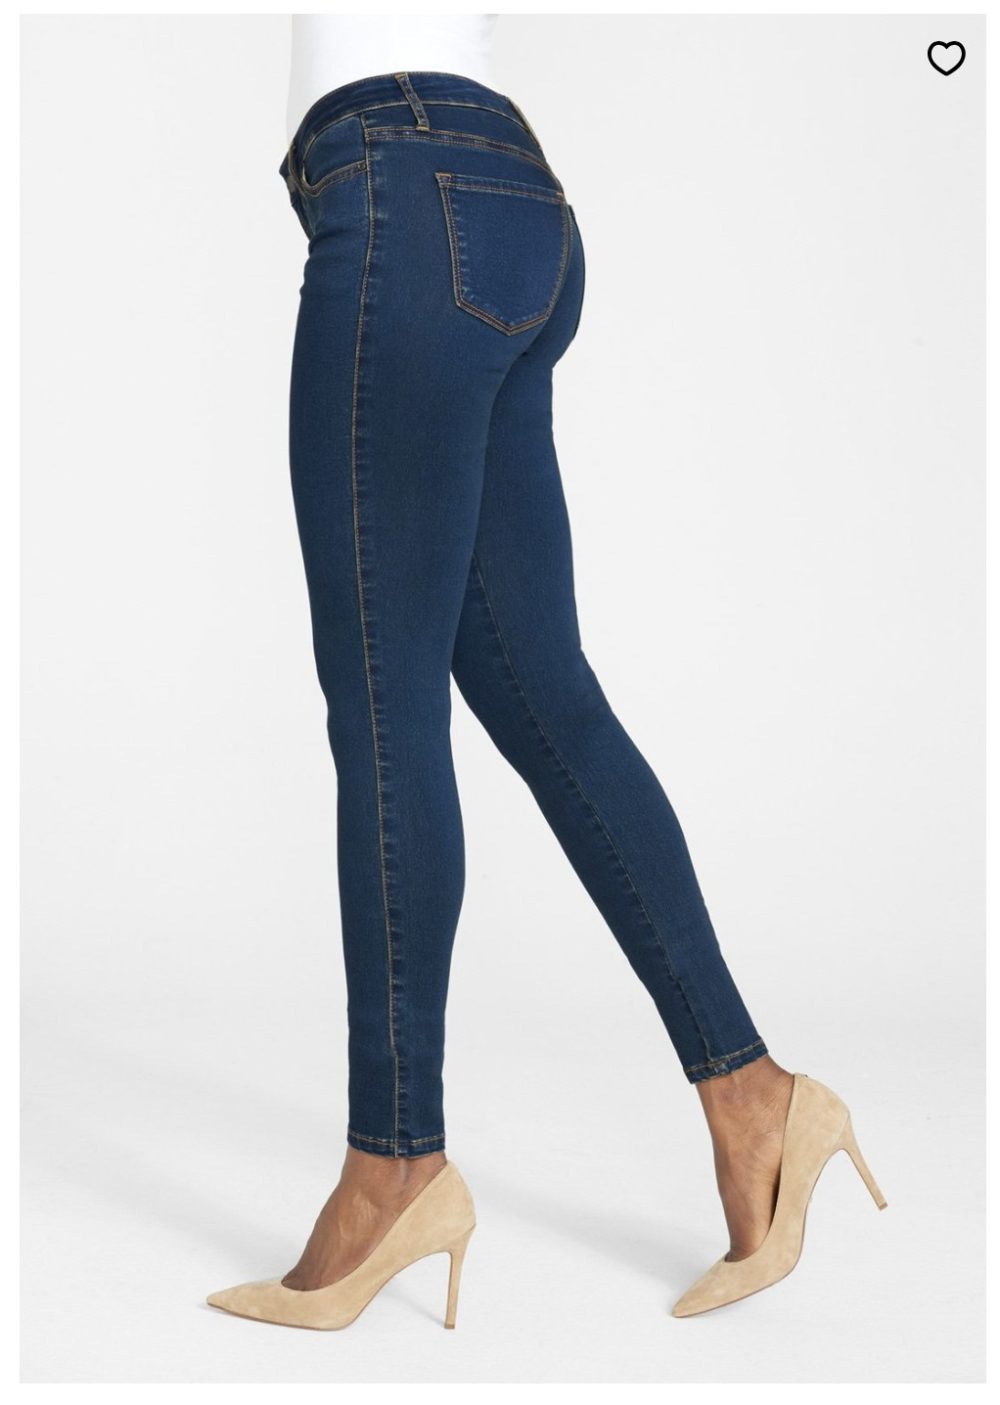 jeans for tall women